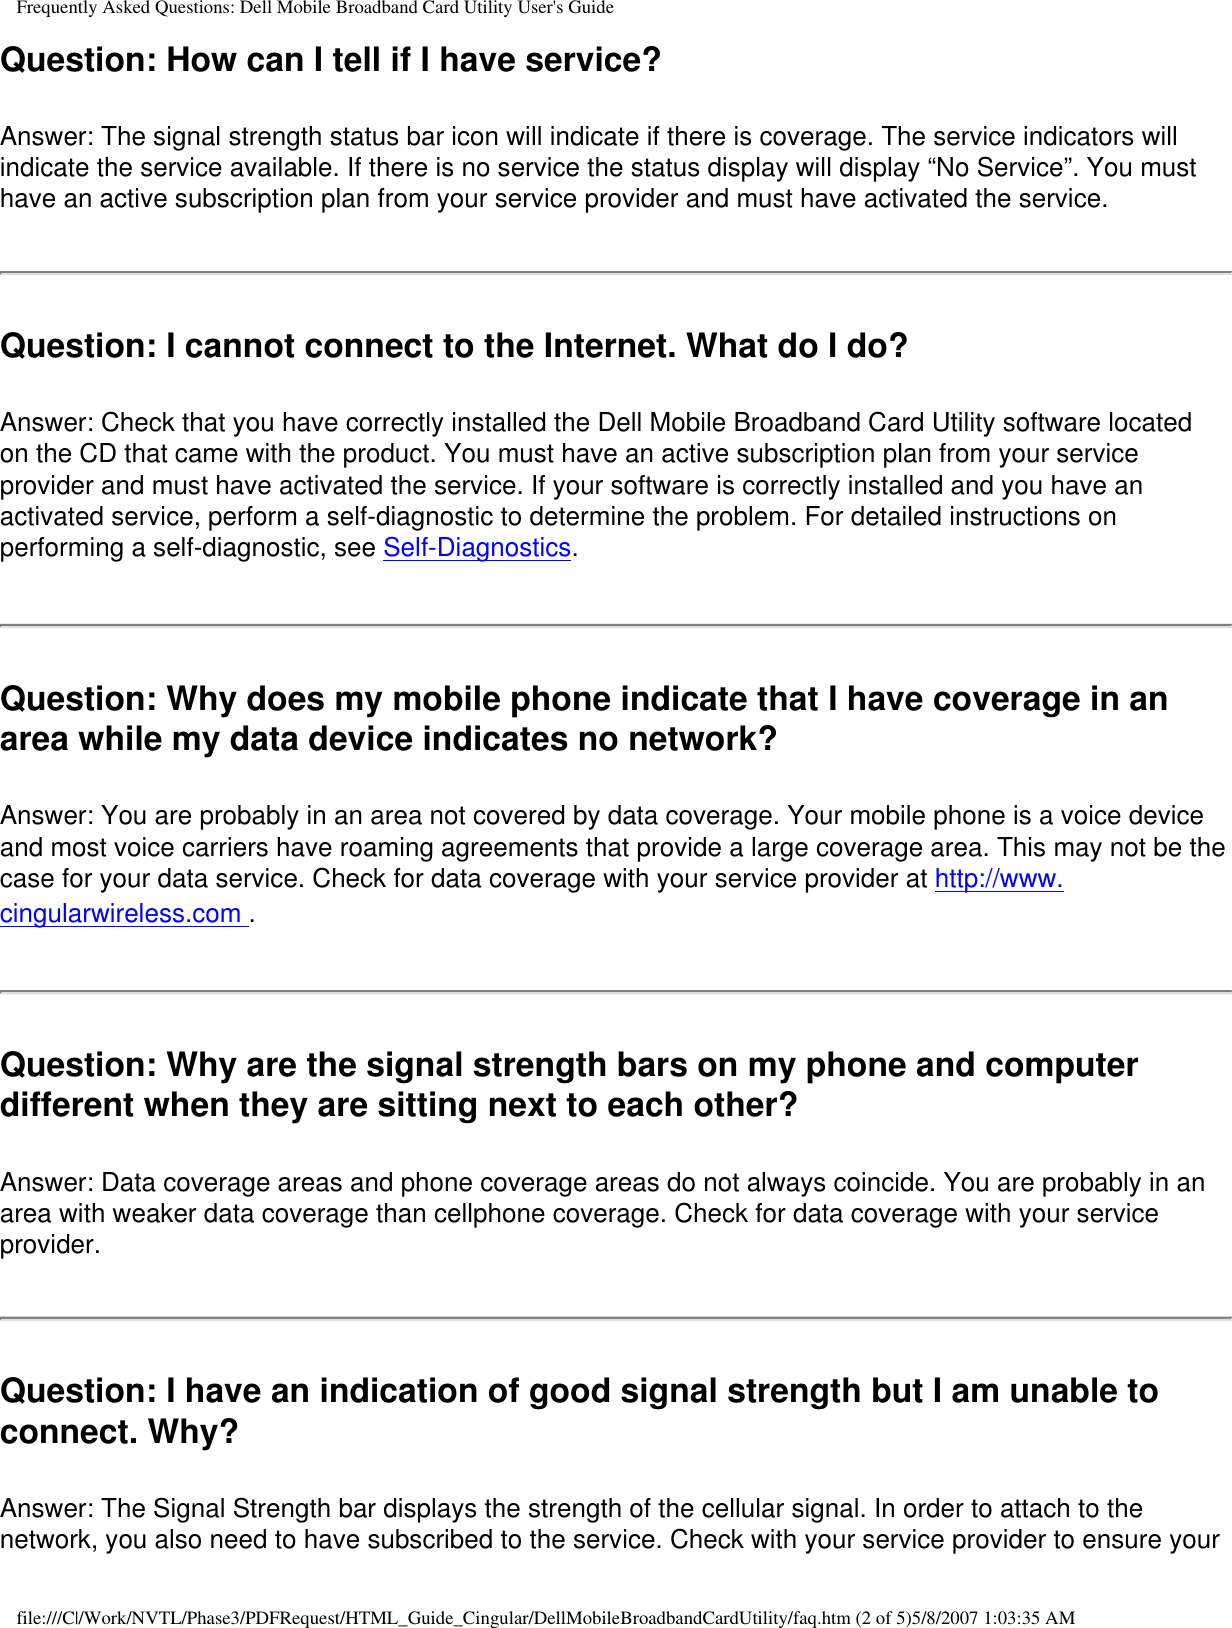 Frequently Asked Questions: Dell Mobile Broadband Card Utility User&apos;s GuideQuestion: How can I tell if I have service? Answer: The signal strength status bar icon will indicate if there is coverage. The service indicators will indicate the service available. If there is no service the status display will display “No Service”. You must have an active subscription plan from your service provider and must have activated the service.Question: I cannot connect to the Internet. What do I do? Answer: Check that you have correctly installed the Dell Mobile Broadband Card Utility software located on the CD that came with the product. You must have an active subscription plan from your service provider and must have activated the service. If your software is correctly installed and you have an activated service, perform a self-diagnostic to determine the problem. For detailed instructions on performing a self-diagnostic, see Self-Diagnostics.Question: Why does my mobile phone indicate that I have coverage in an area while my data device indicates no network? Answer: You are probably in an area not covered by data coverage. Your mobile phone is a voice device and most voice carriers have roaming agreements that provide a large coverage area. This may not be the case for your data service. Check for data coverage with your service provider at http://www.cingularwireless.com .Question: Why are the signal strength bars on my phone and computer different when they are sitting next to each other? Answer: Data coverage areas and phone coverage areas do not always coincide. You are probably in an area with weaker data coverage than cellphone coverage. Check for data coverage with your service provider.Question: I have an indication of good signal strength but I am unable to connect. Why? Answer: The Signal Strength bar displays the strength of the cellular signal. In order to attach to the network, you also need to have subscribed to the service. Check with your service provider to ensure your file:///C|/Work/NVTL/Phase3/PDFRequest/HTML_Guide_Cingular/DellMobileBroadbandCardUtility/faq.htm (2 of 5)5/8/2007 1:03:35 AM